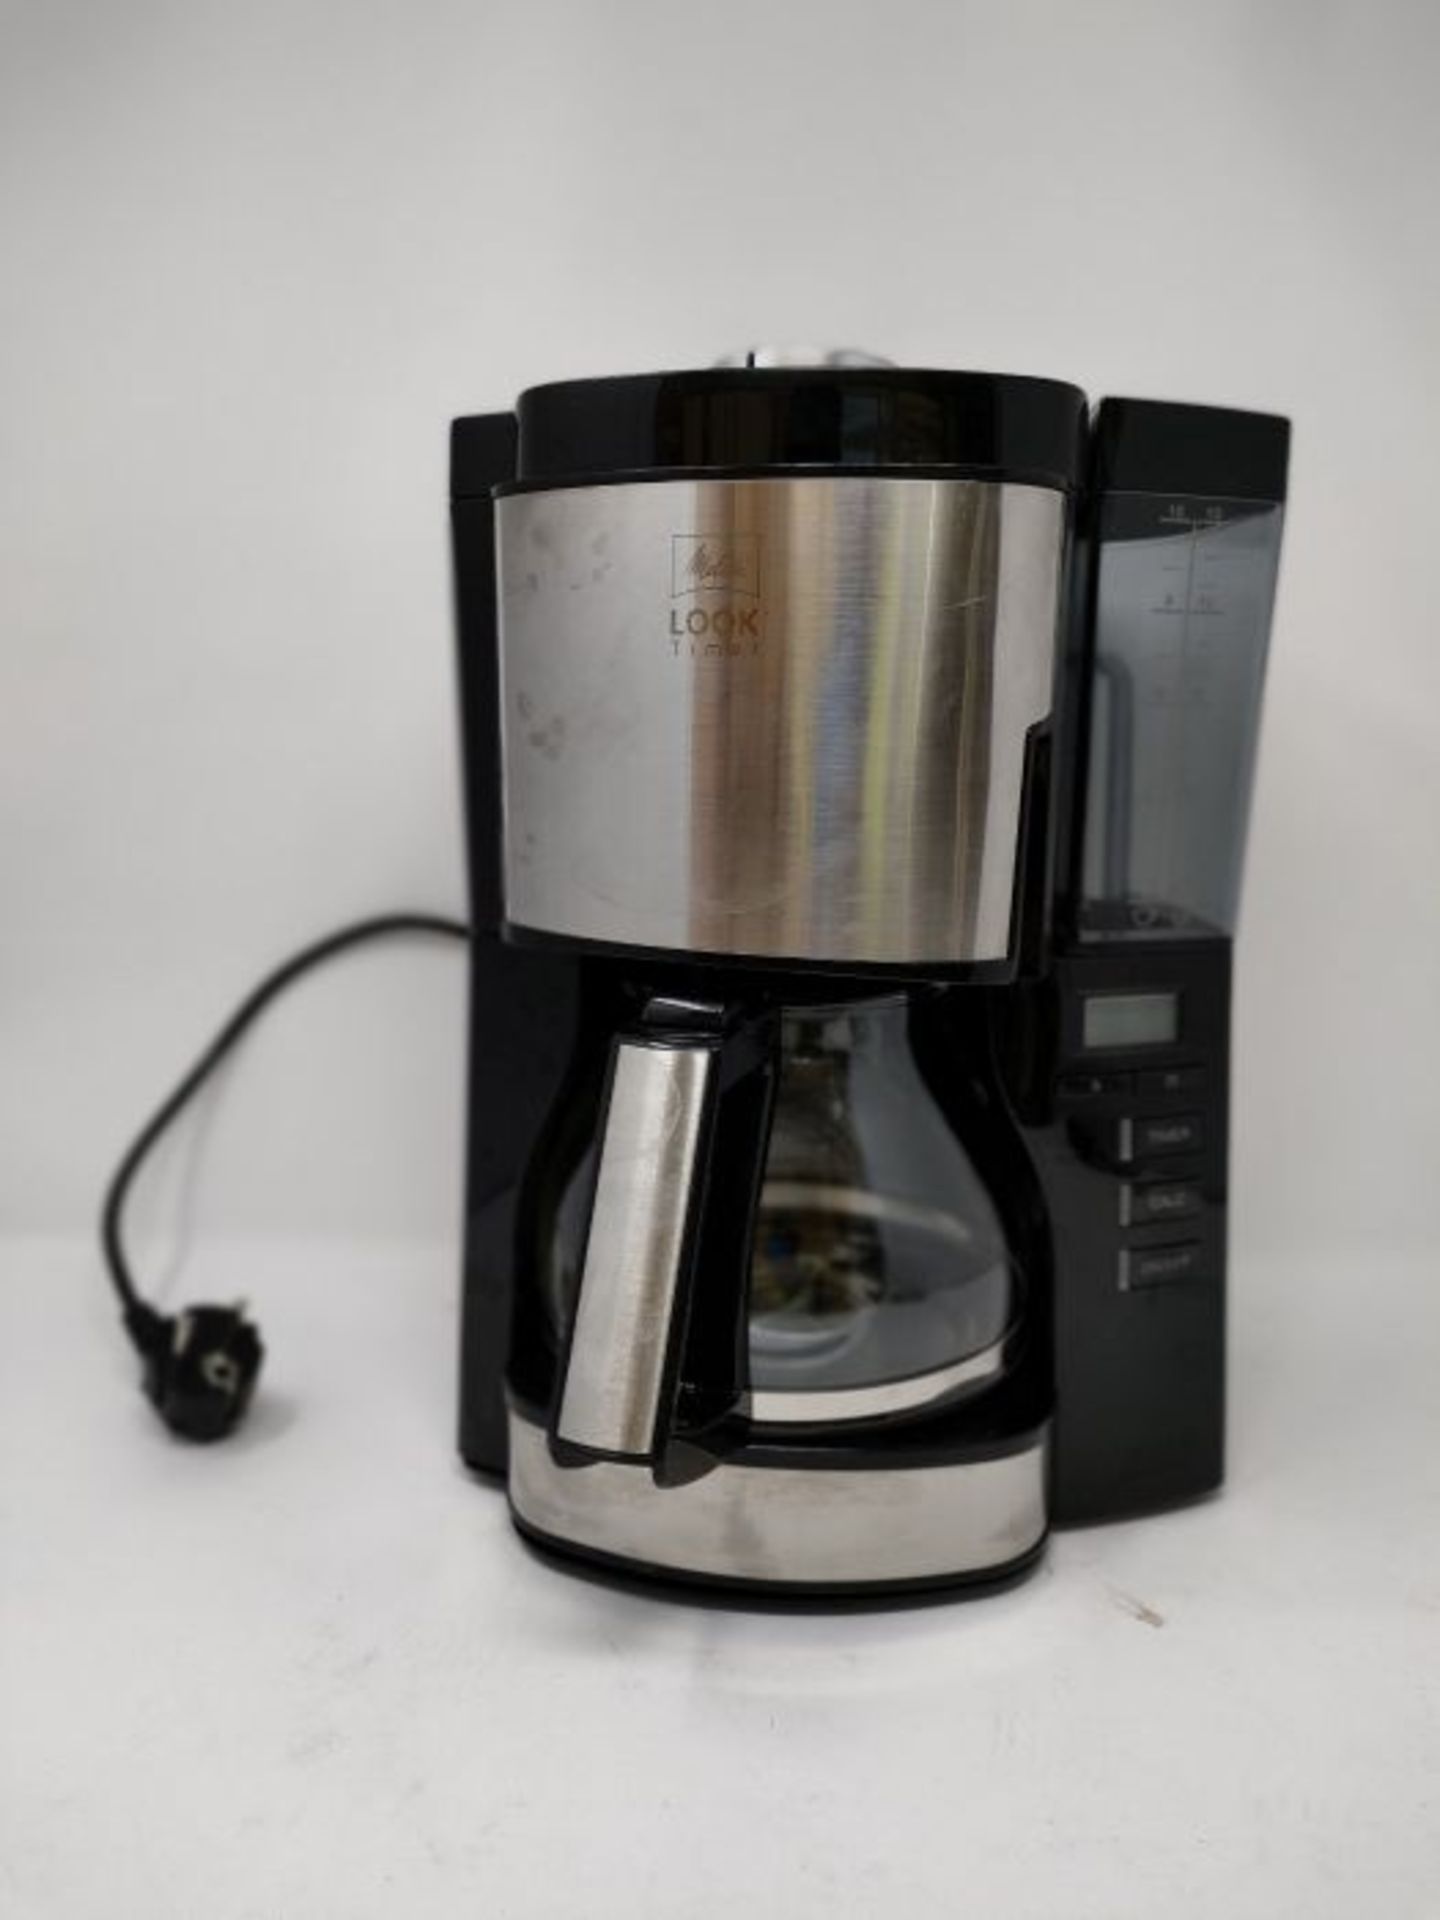 RRP £64.00 Melitta Filter Coffee Machine, Look V Timer Model, Art. No. 6766591, Stainless Steel, - Image 3 of 3